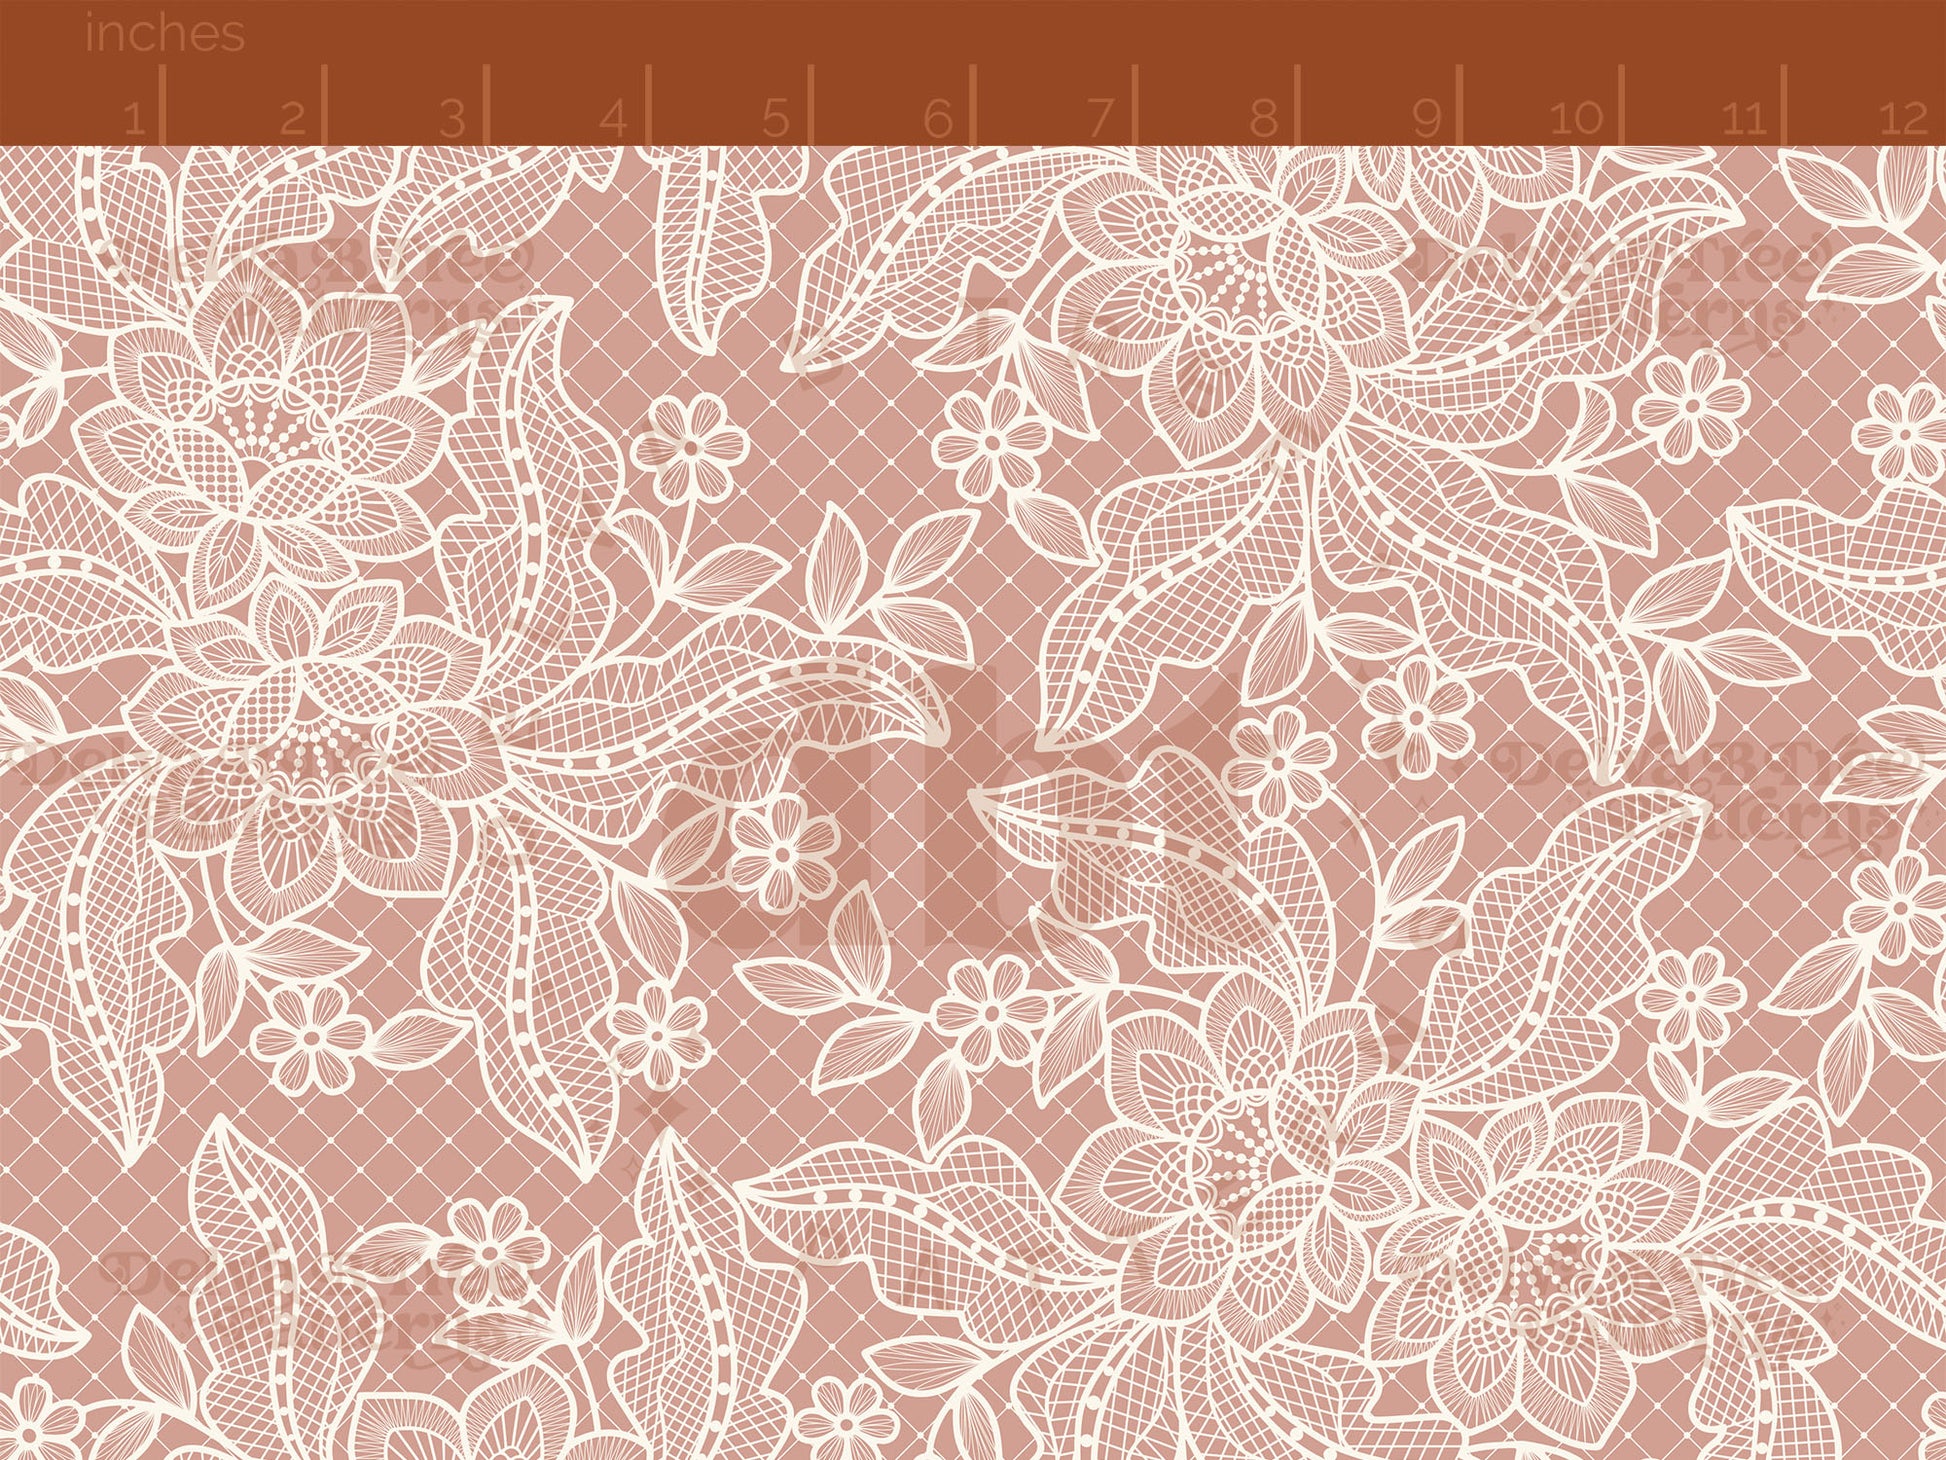 Off white flowers, leaves and faux lace netting on a dusty rose background seamless pattern scale digital file for small shops that make handmade products in small batches.